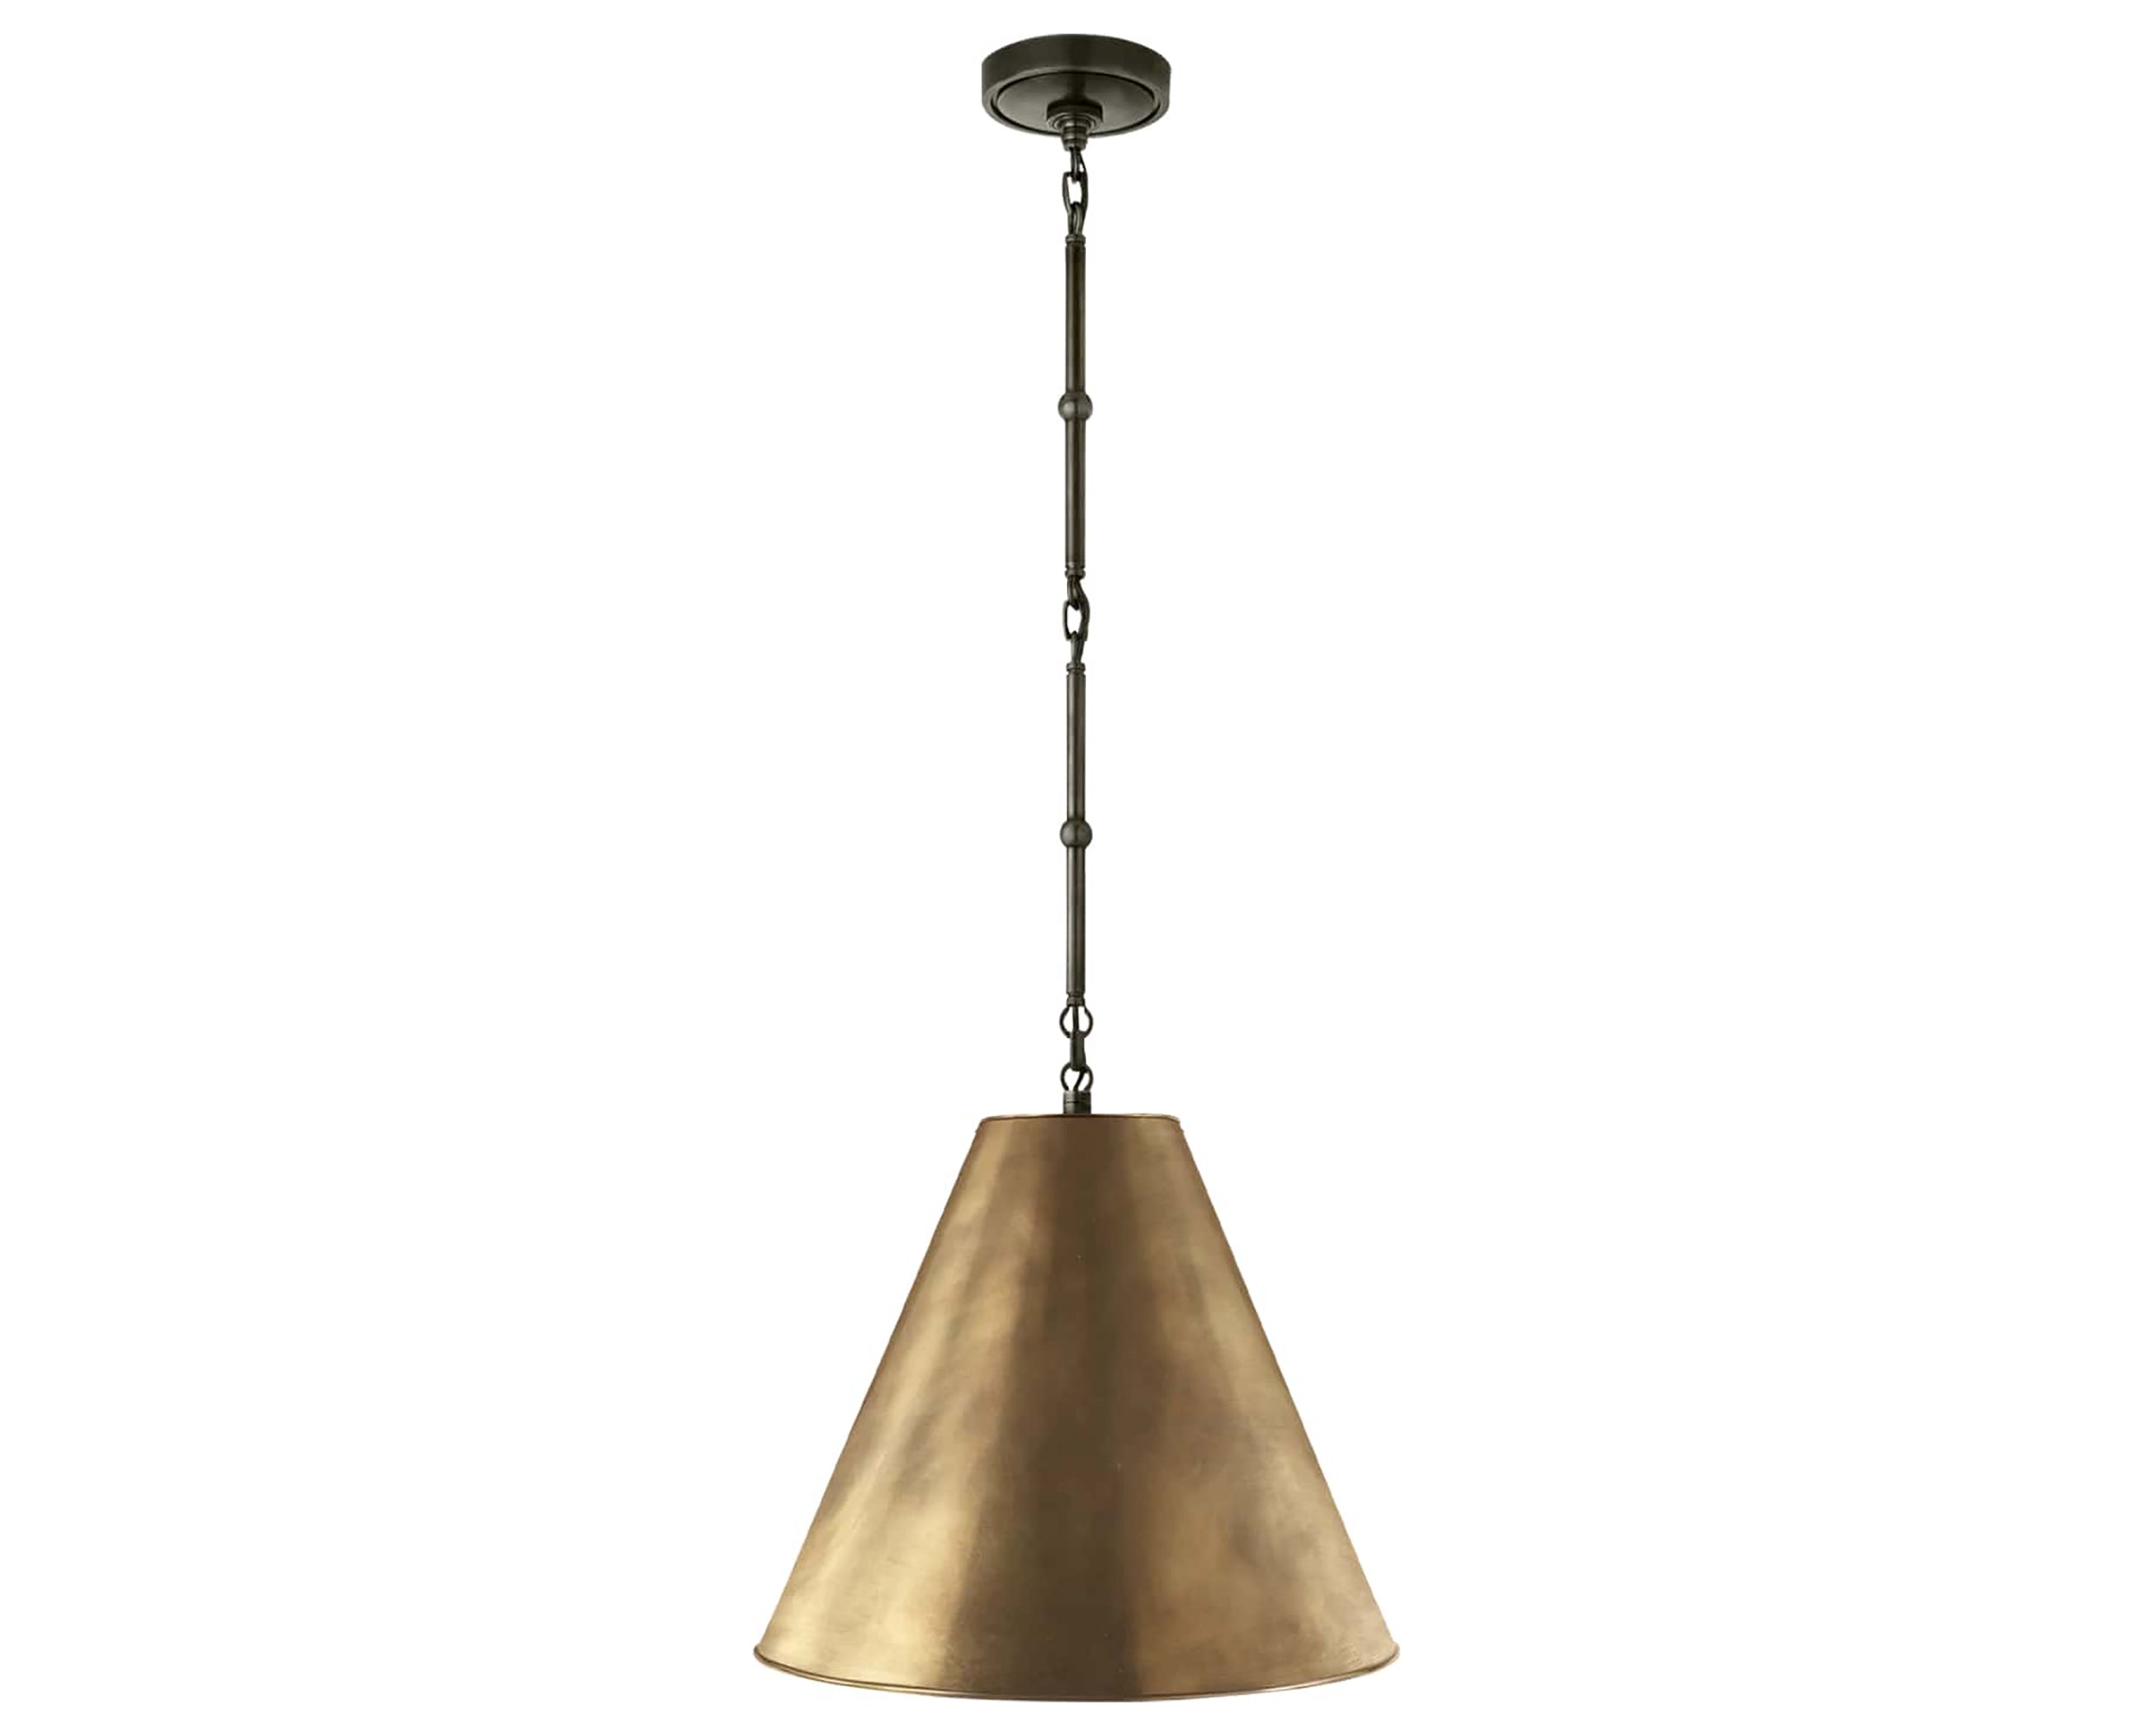 Bronze and Hand-Rubbed Antique Brass | Goodman Small Hanging Light | Valley Ridge Furniture